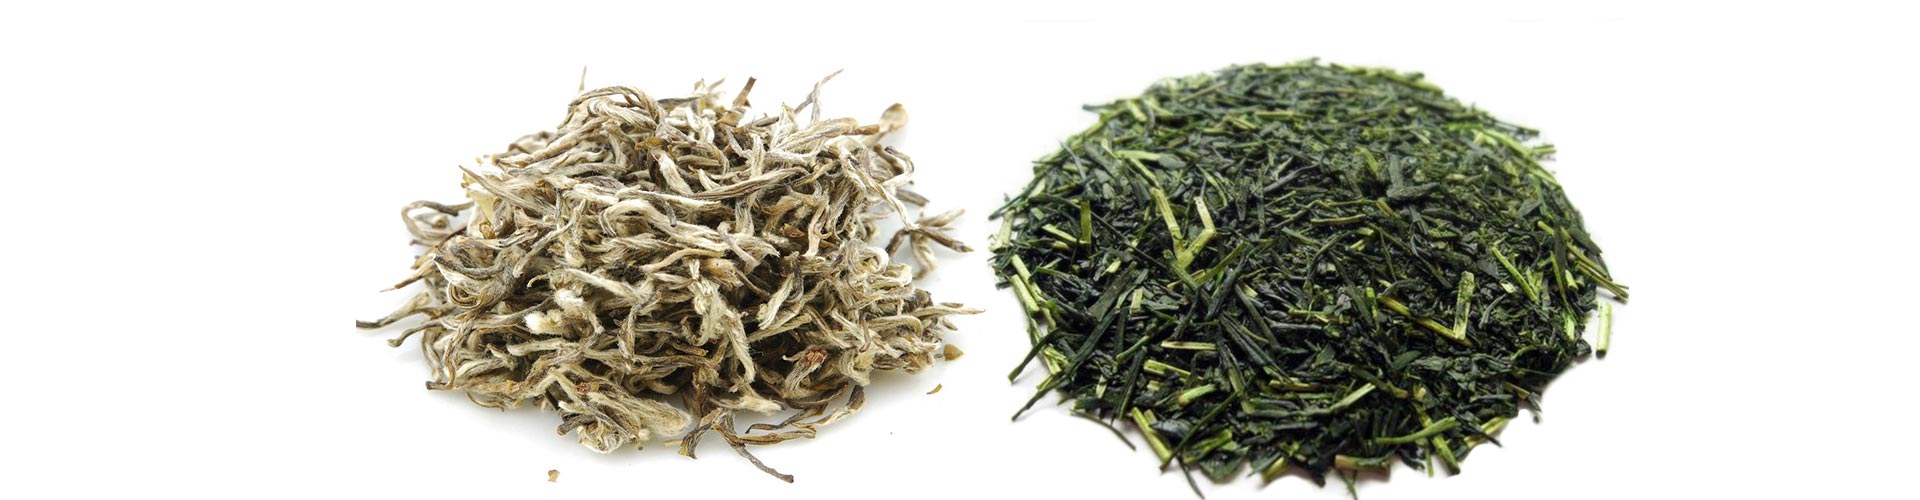 White tea and some green teas taste just like hot water to me? How do I get more flavor?